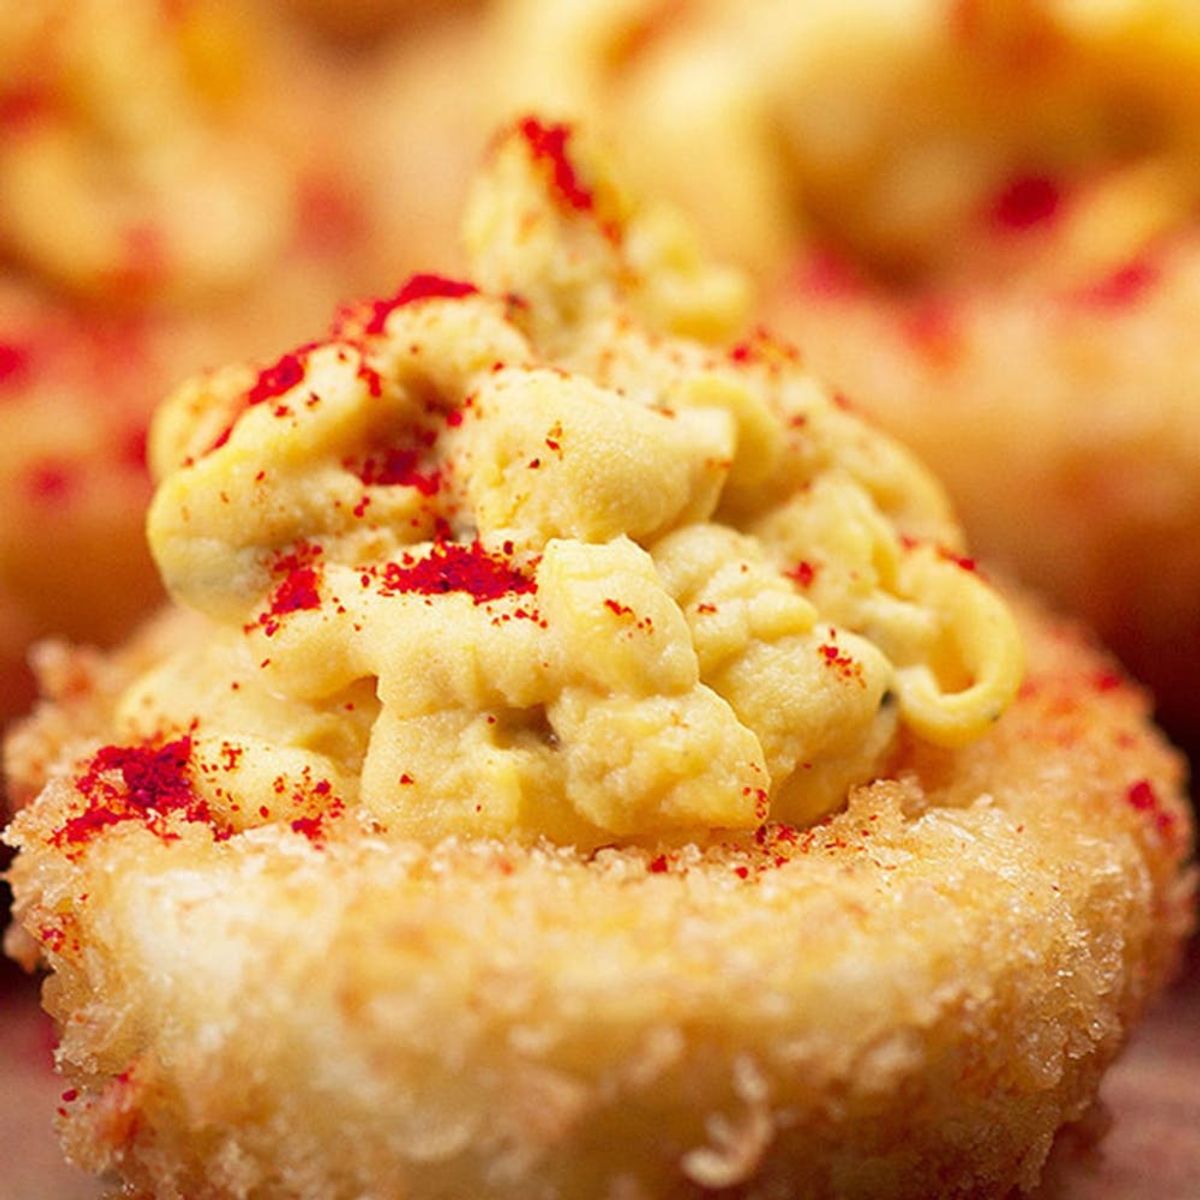 Deep Fried Deviled Eggs + 10 Other Fried Recipes to Eat on Cheat Day